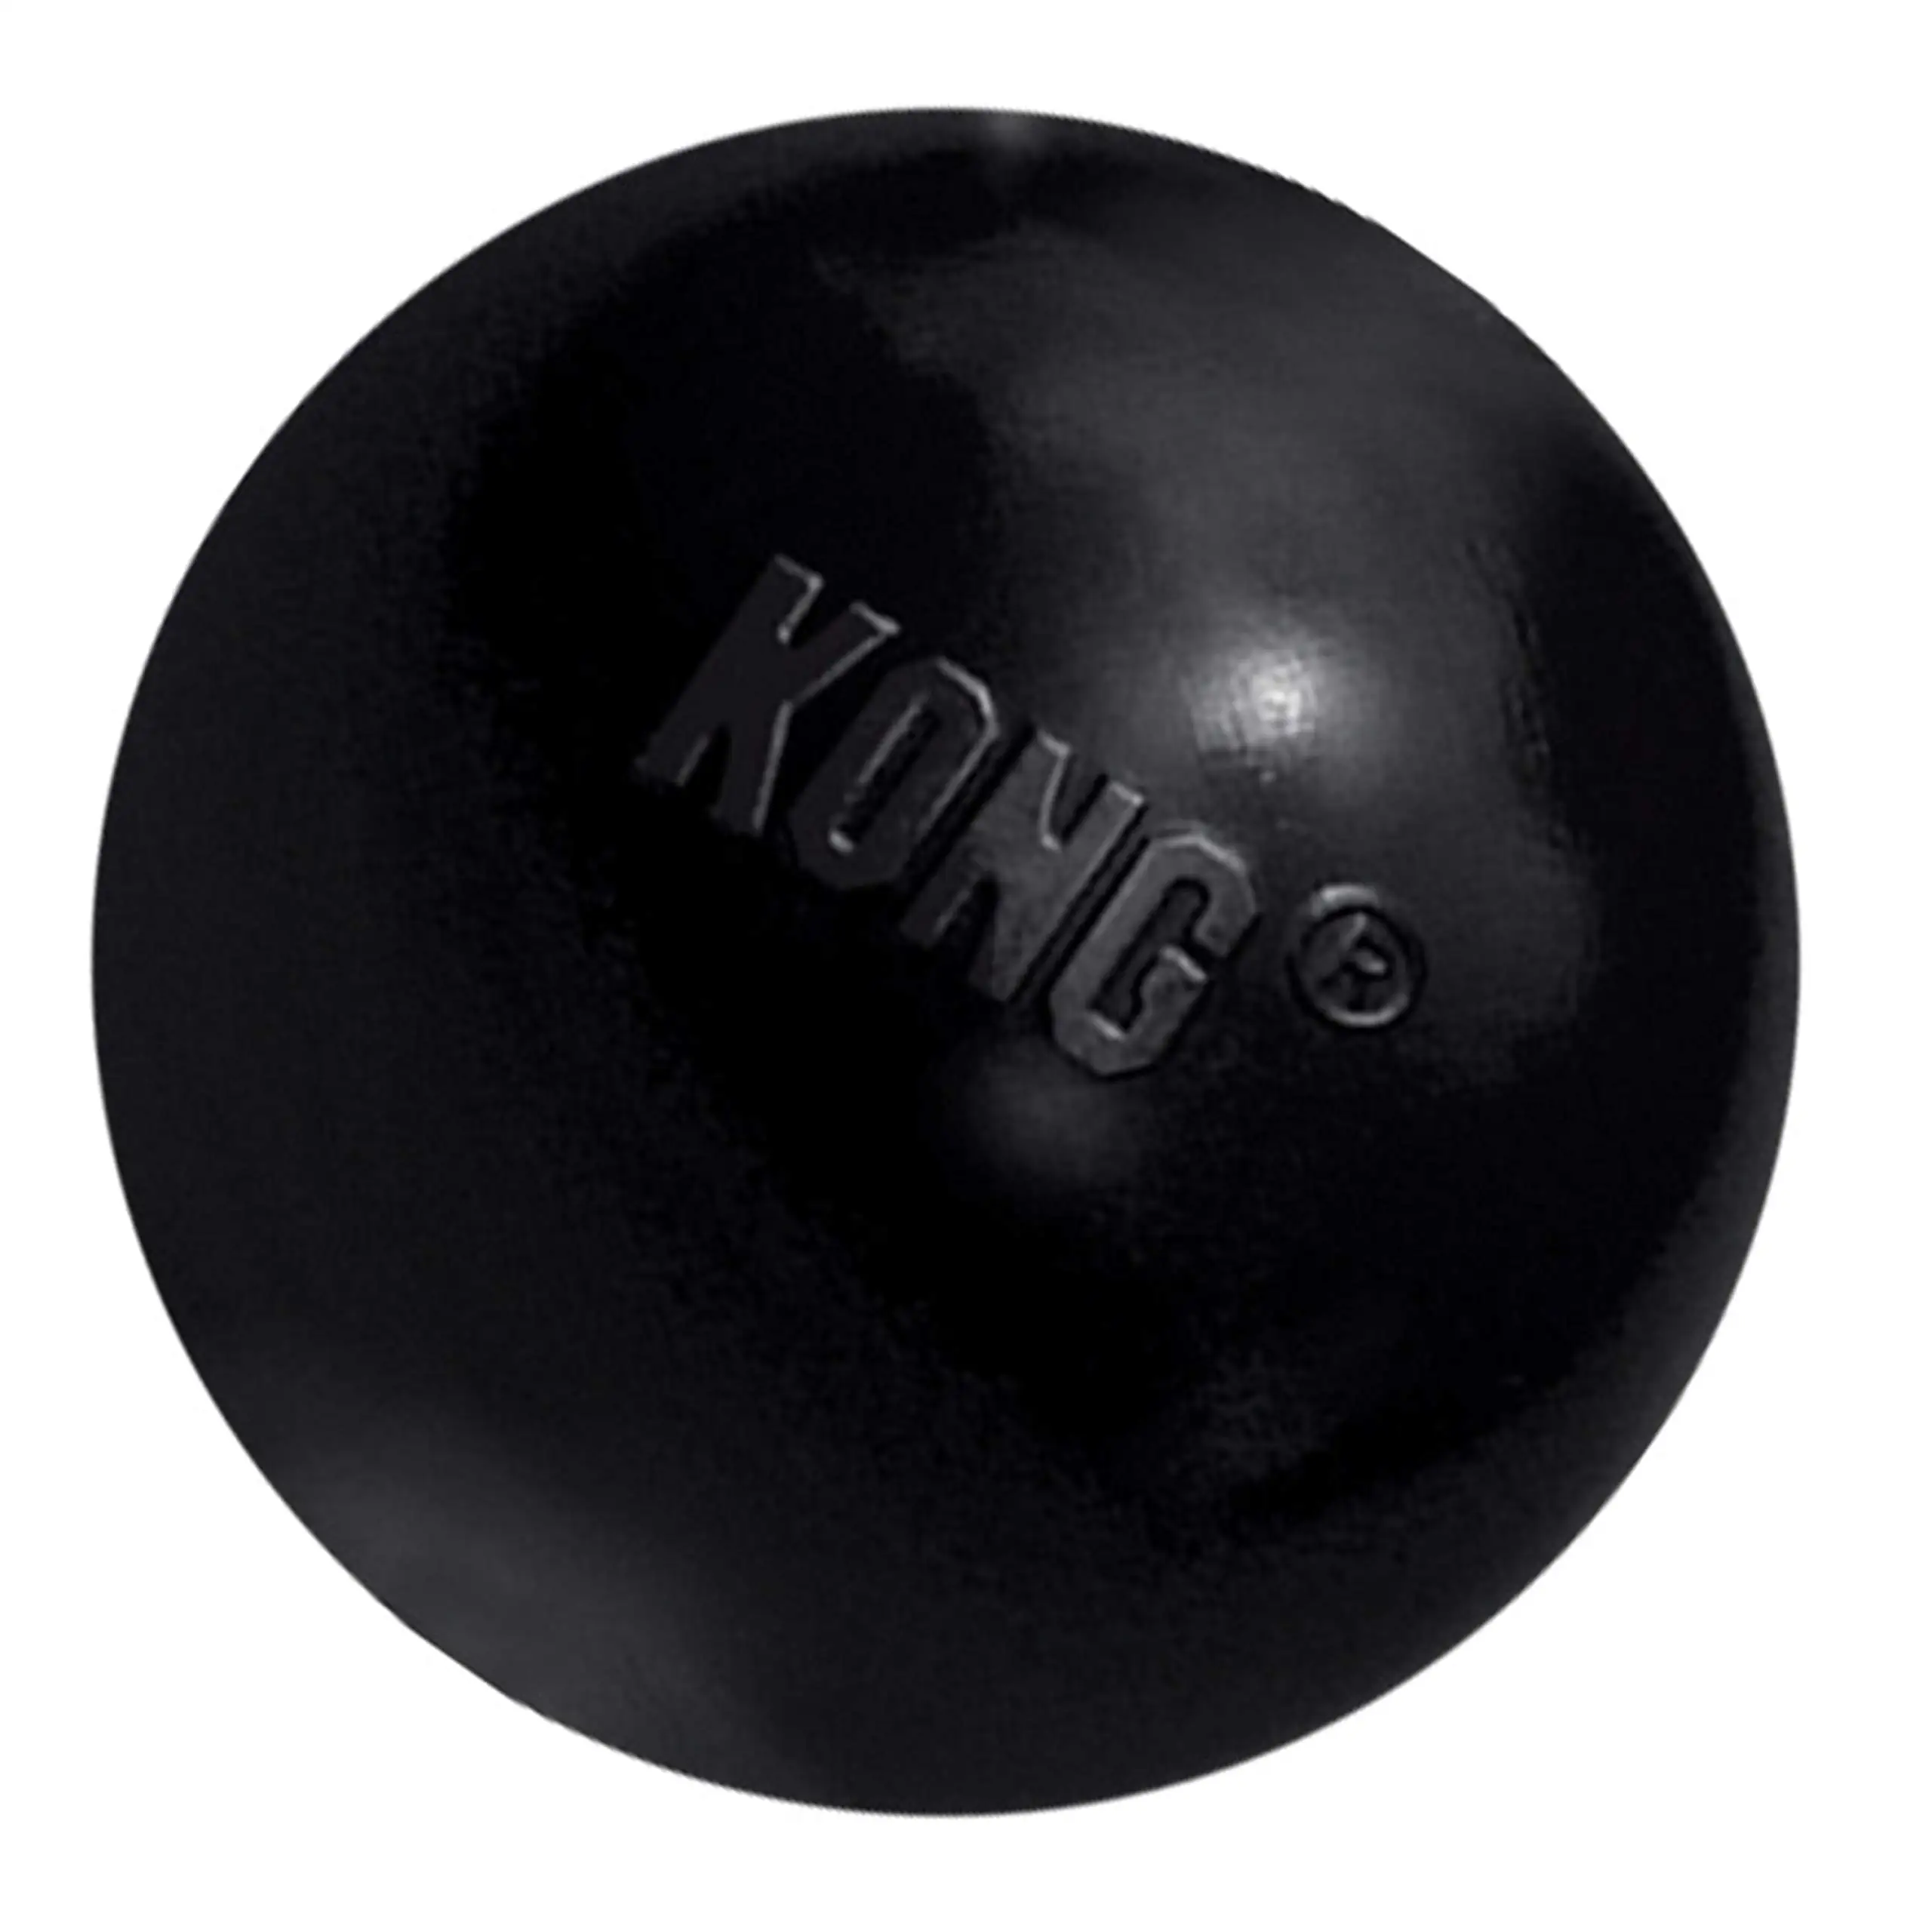 KONG - Extreme Ball - Durable Rubber Dog Toy for Power Chewers, Black